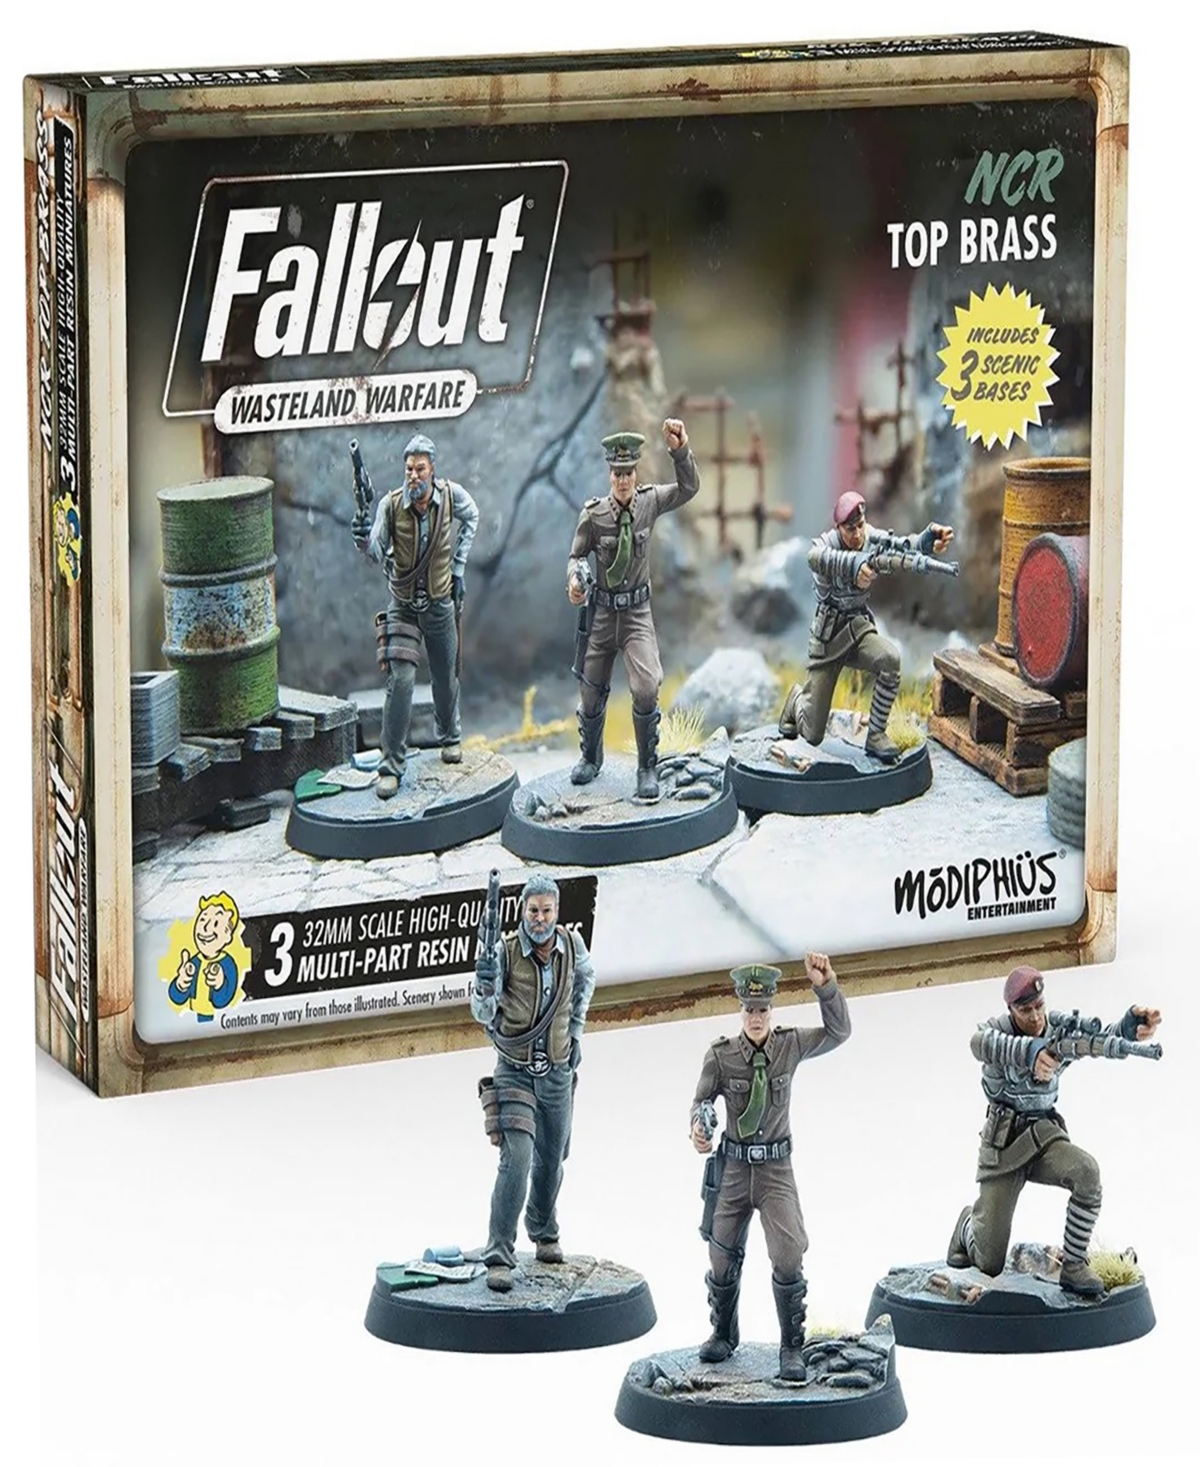 Modiphius Fallout Wasteland Warfare Ncr Top Brass Role Playing Game 3 Figure Set In Multi